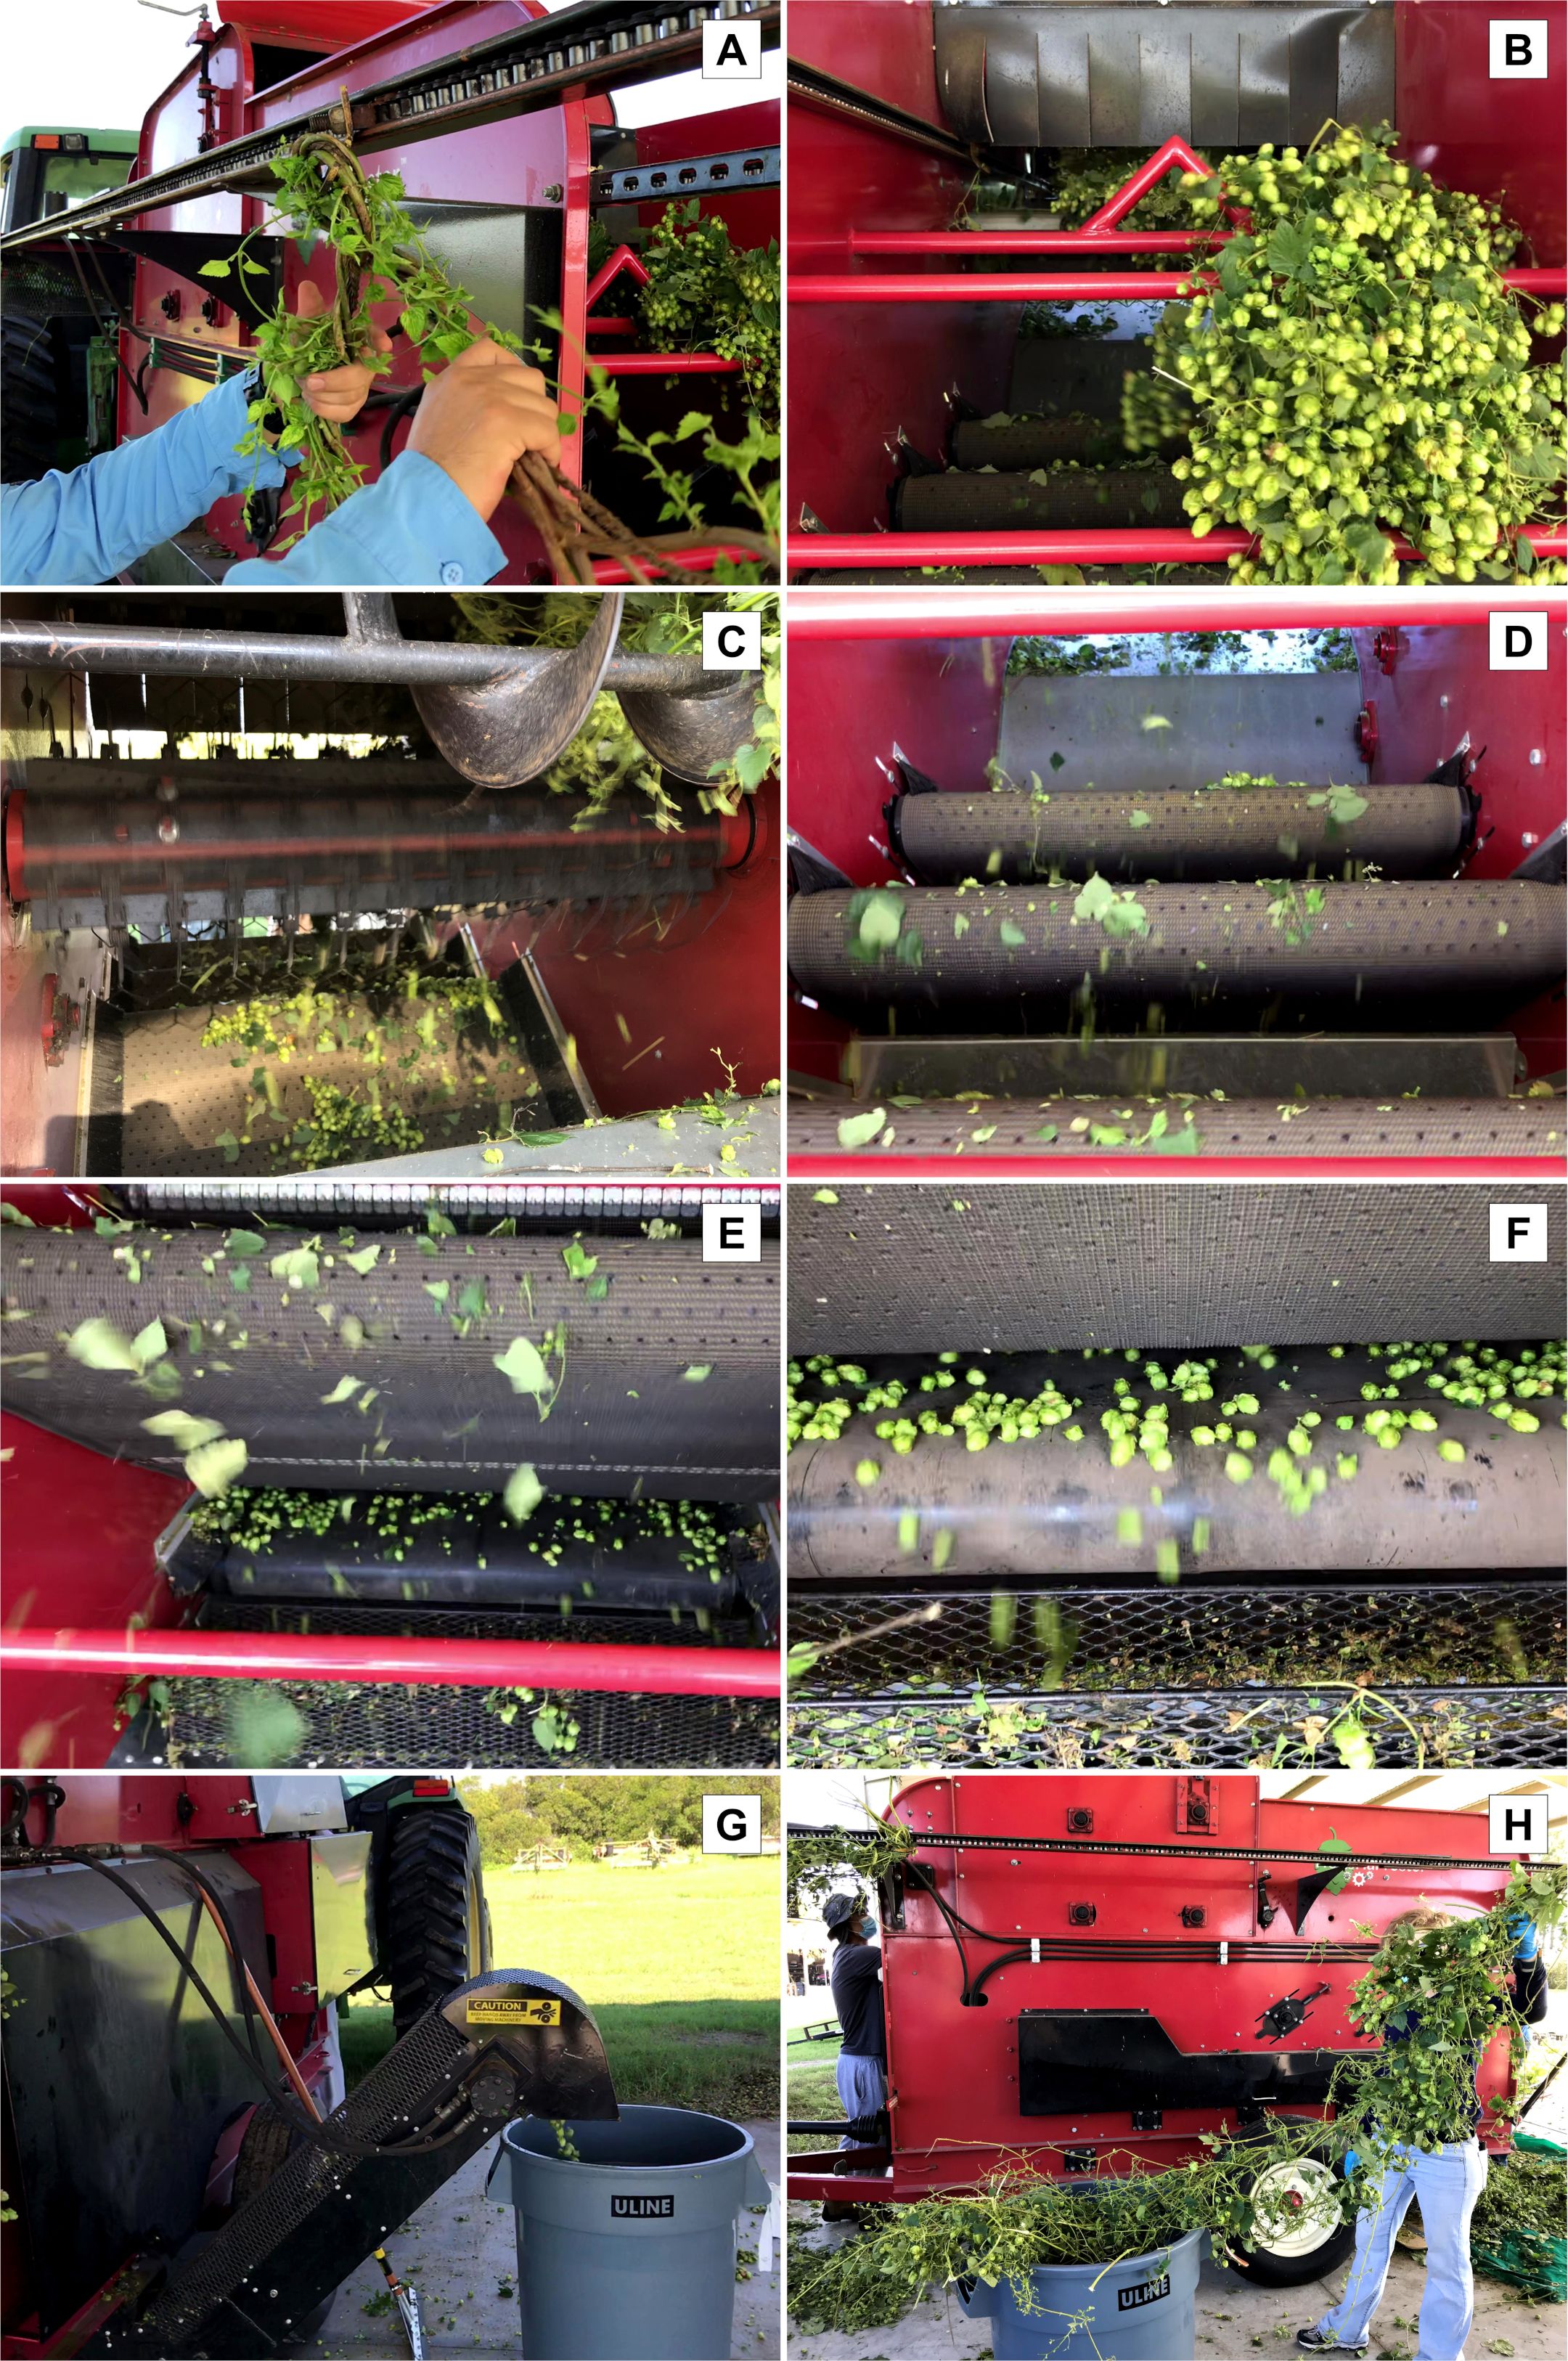 The procedure to separate cones from bines using a mechanical harvester (Hopster 5P). 